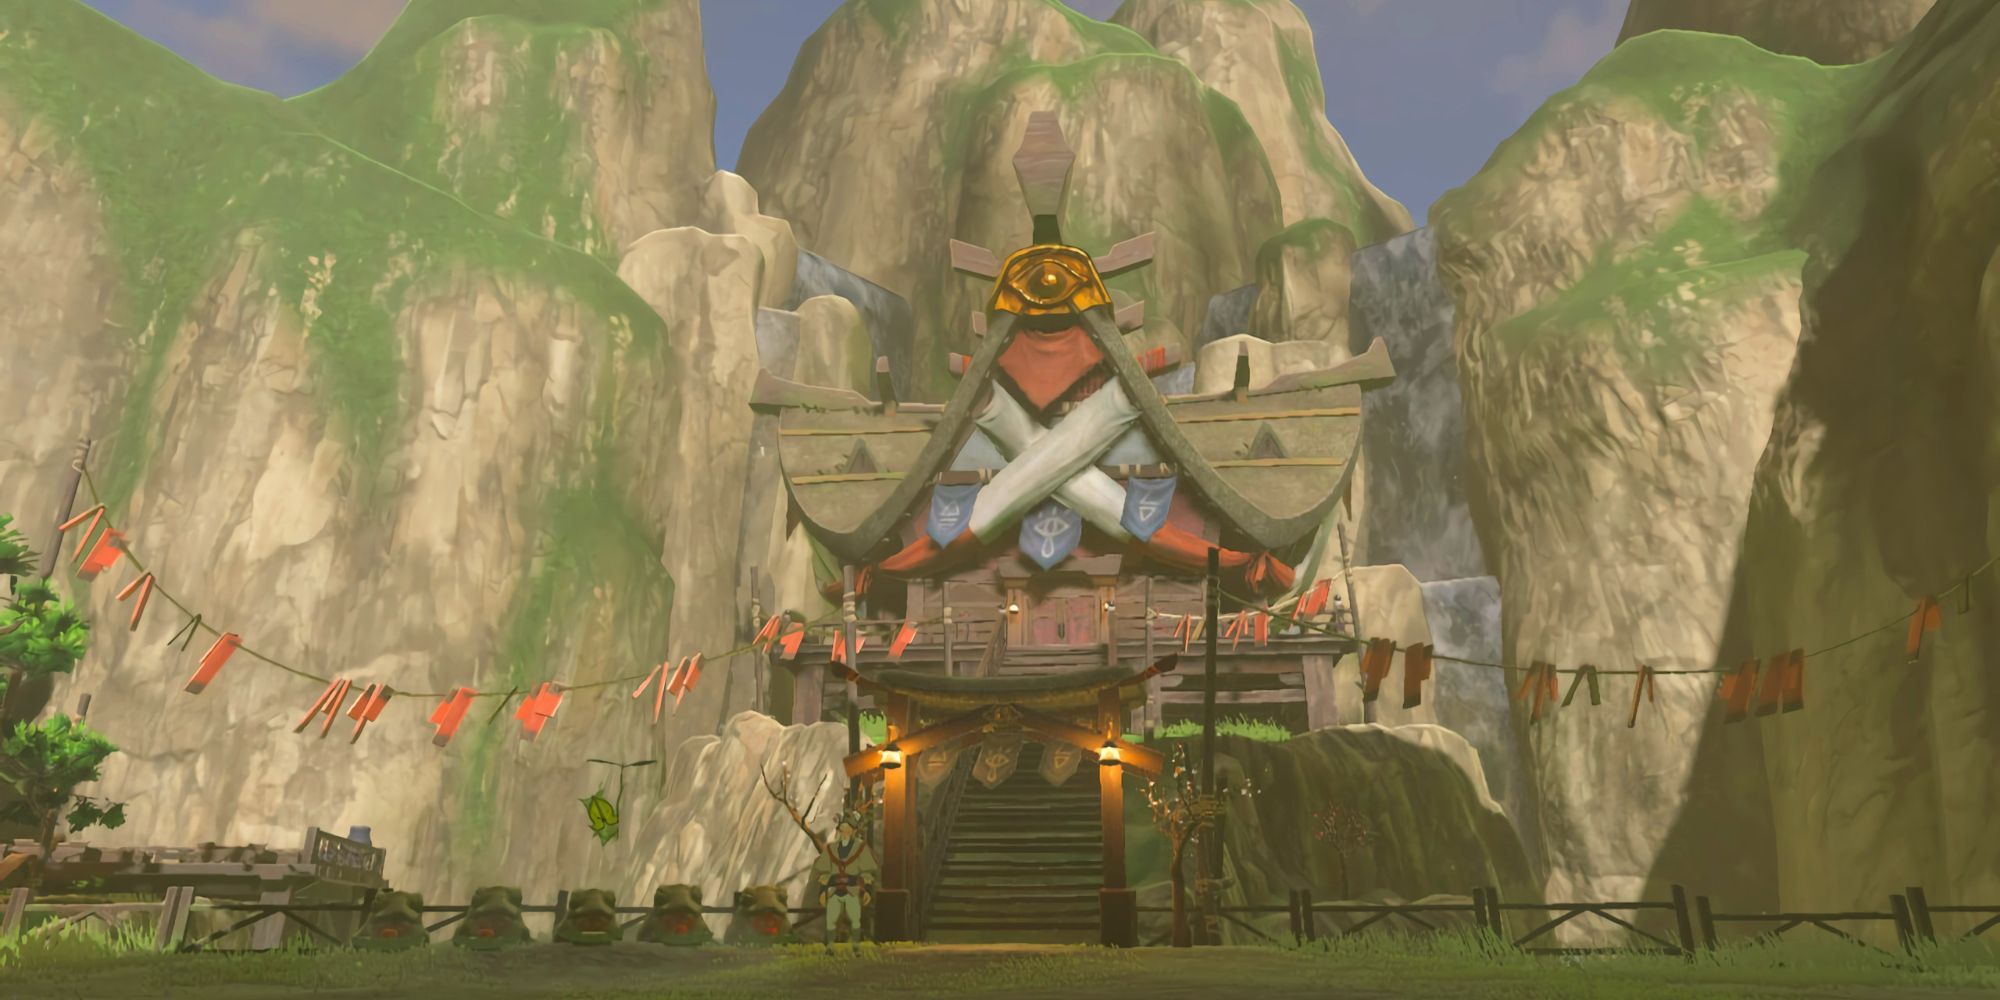 An exterior view of Impa's house in Breath of the Wild's Kakariko Village. Behind the building are the tall stone cliffs that surround the whole village.